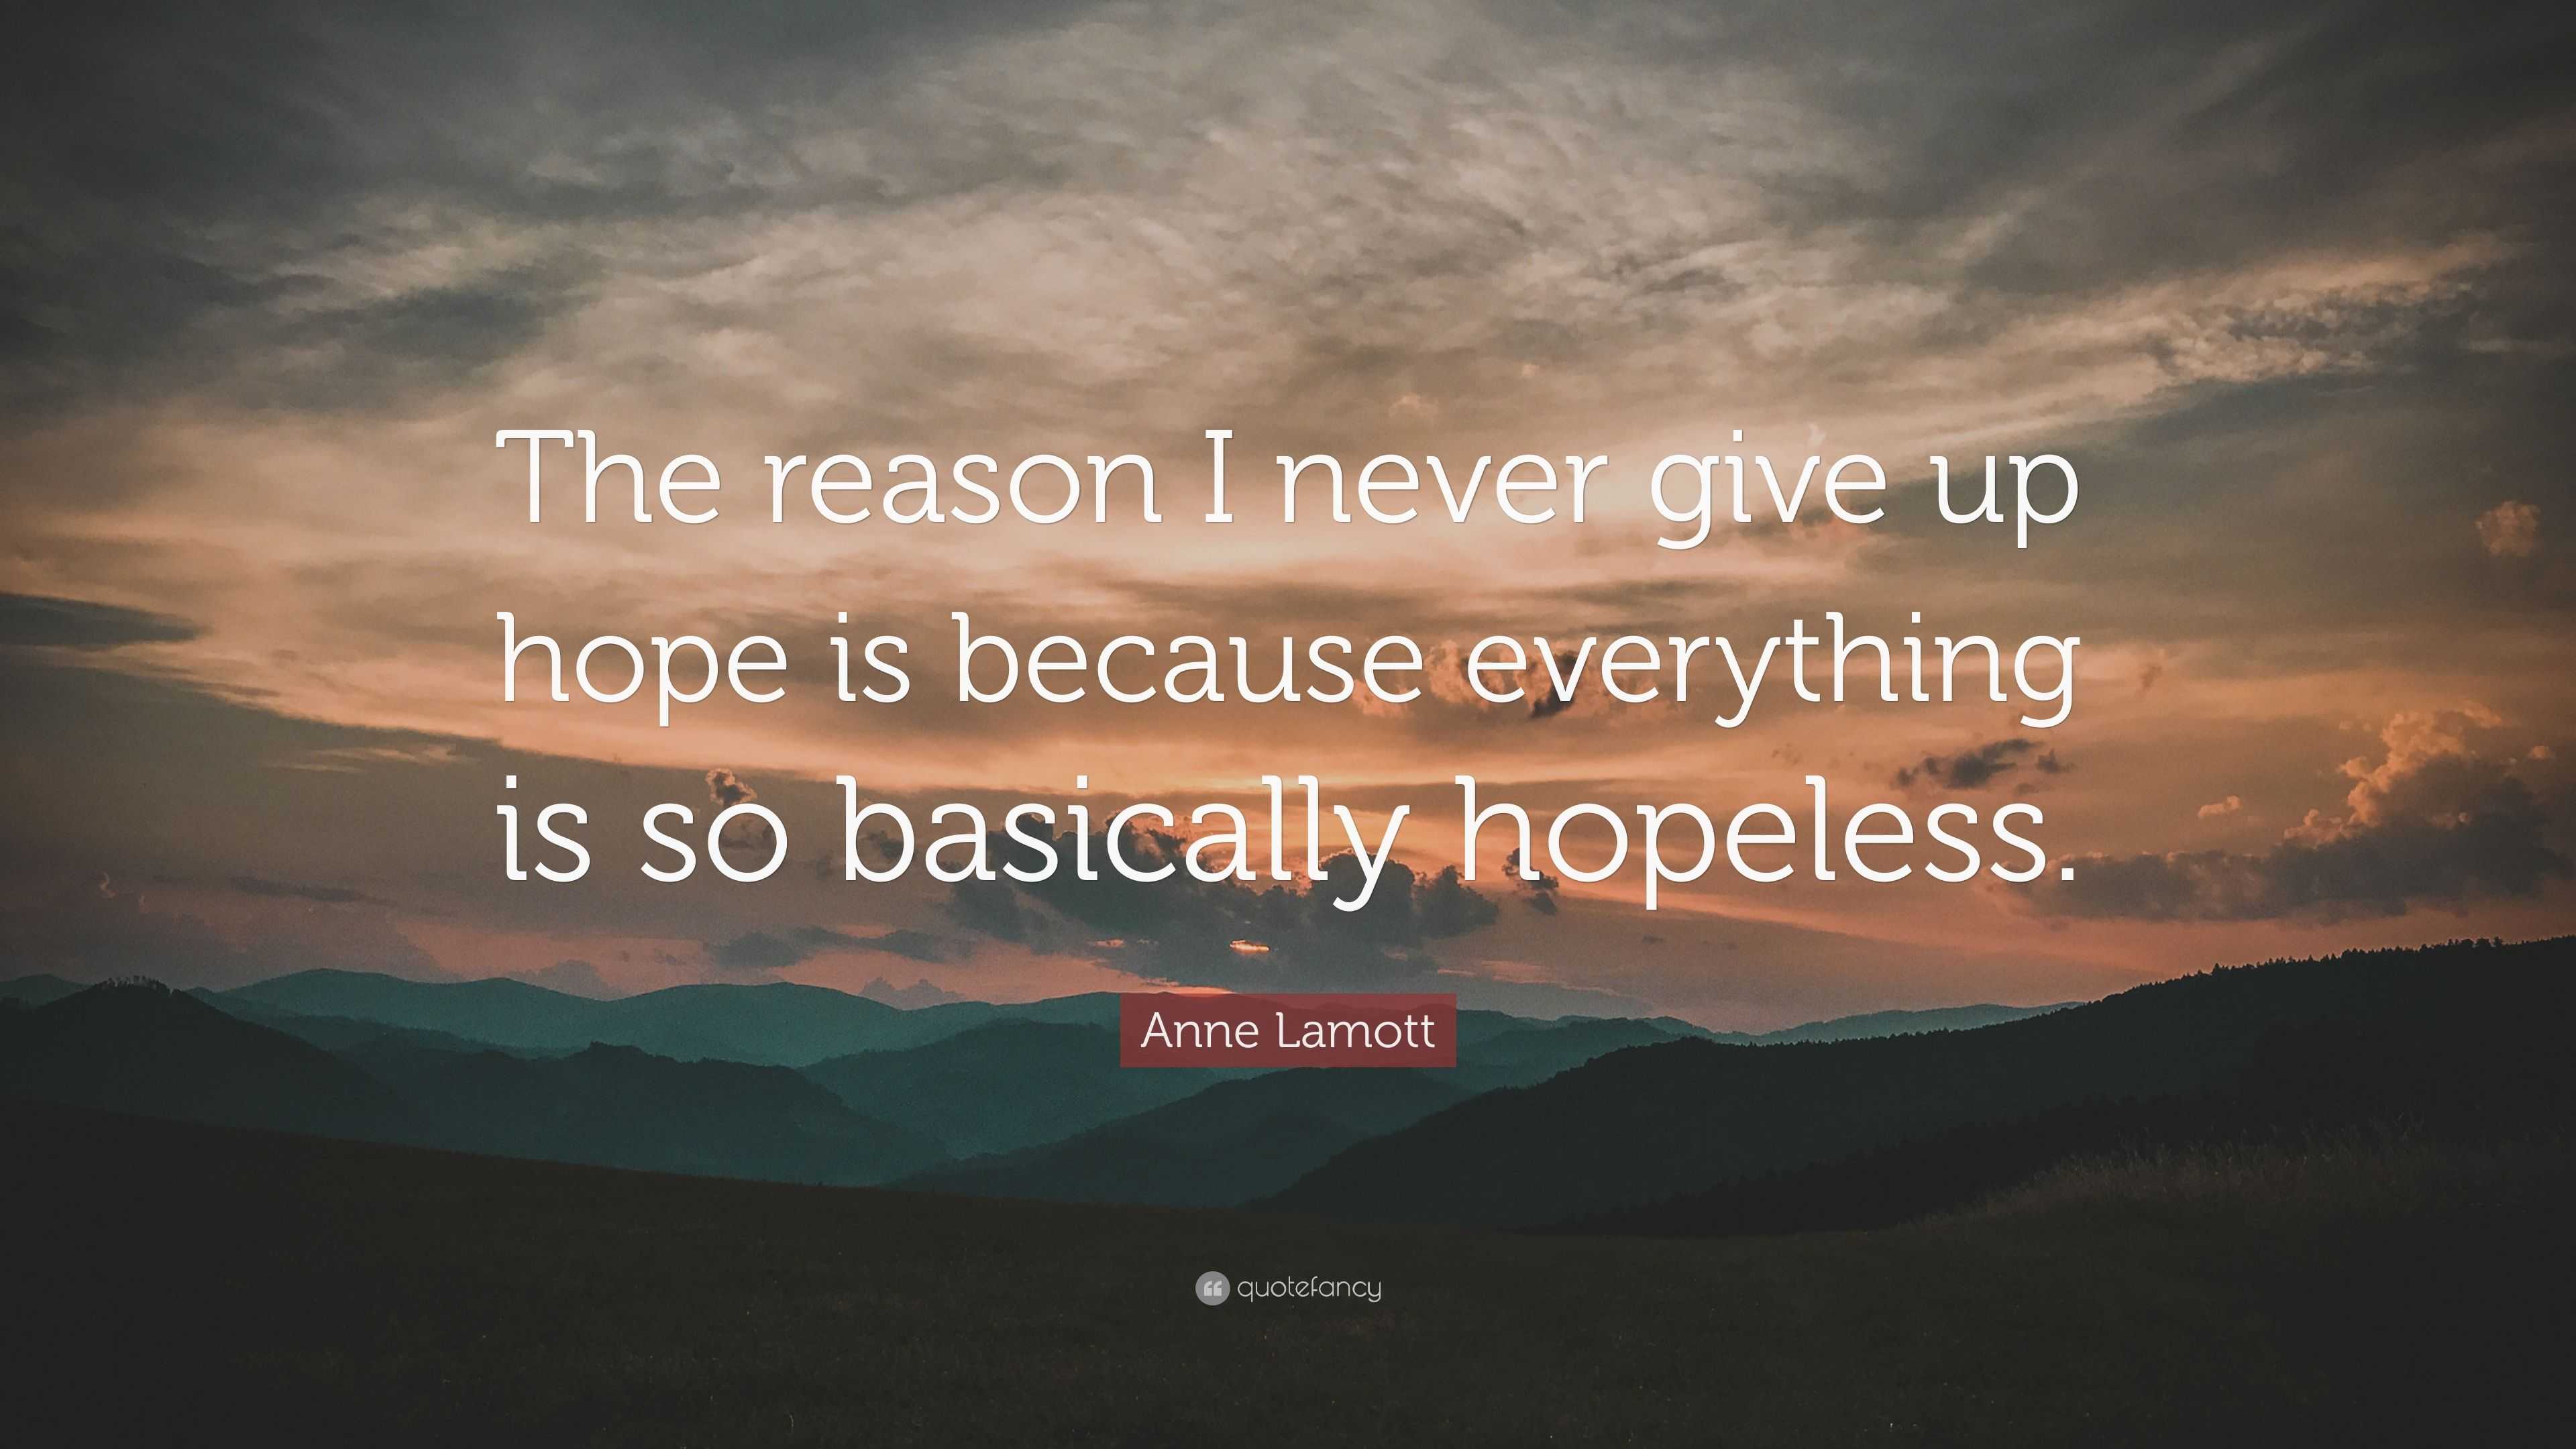 Anne Lamott Quote “the Reason I Never Give Up Hope Is Because Everything Is So Basically Hopeless ”